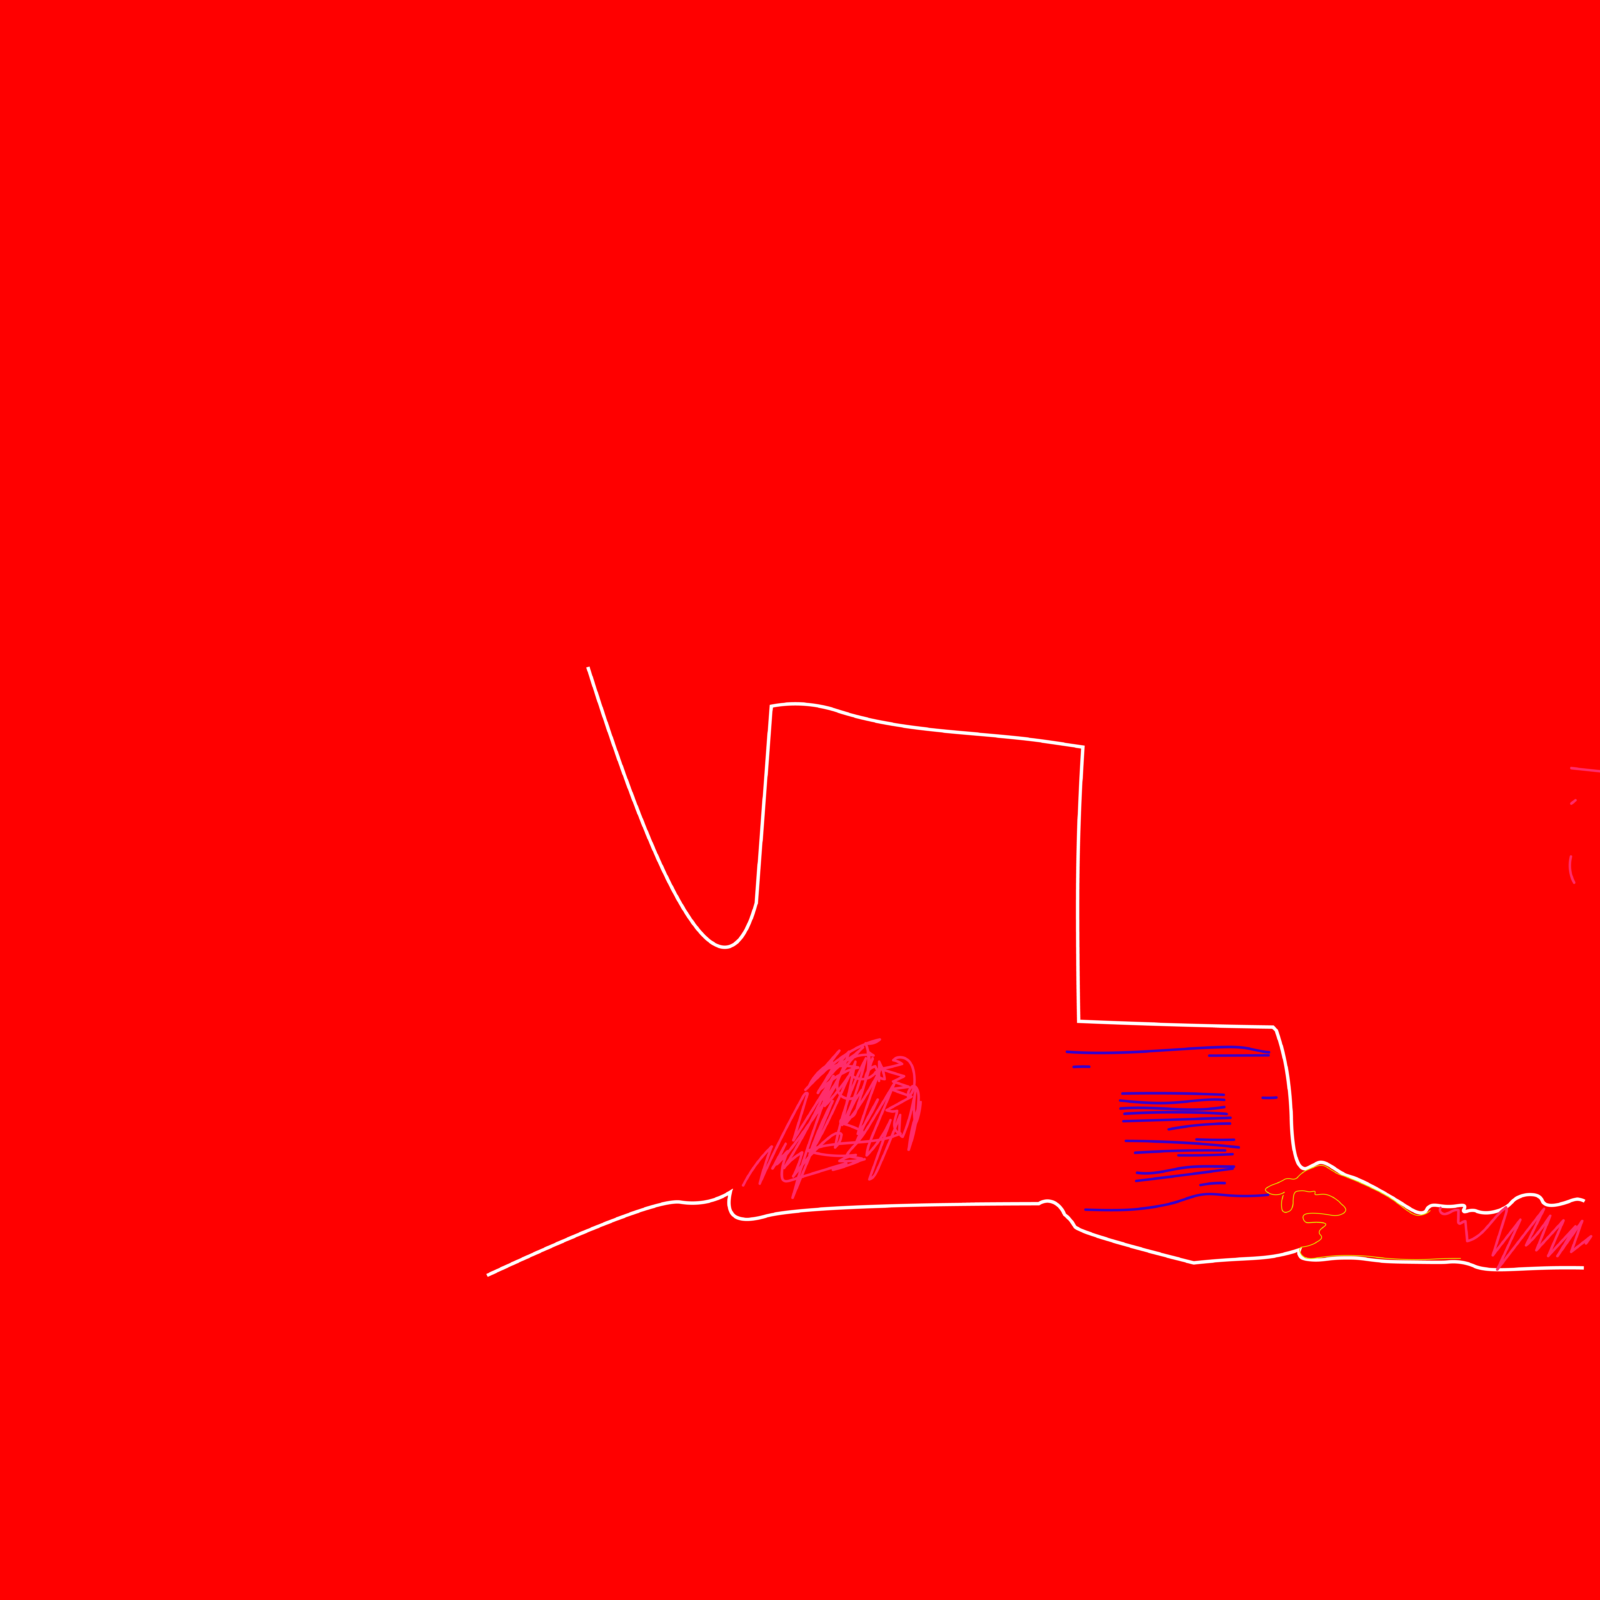 A red background with white line drawings.